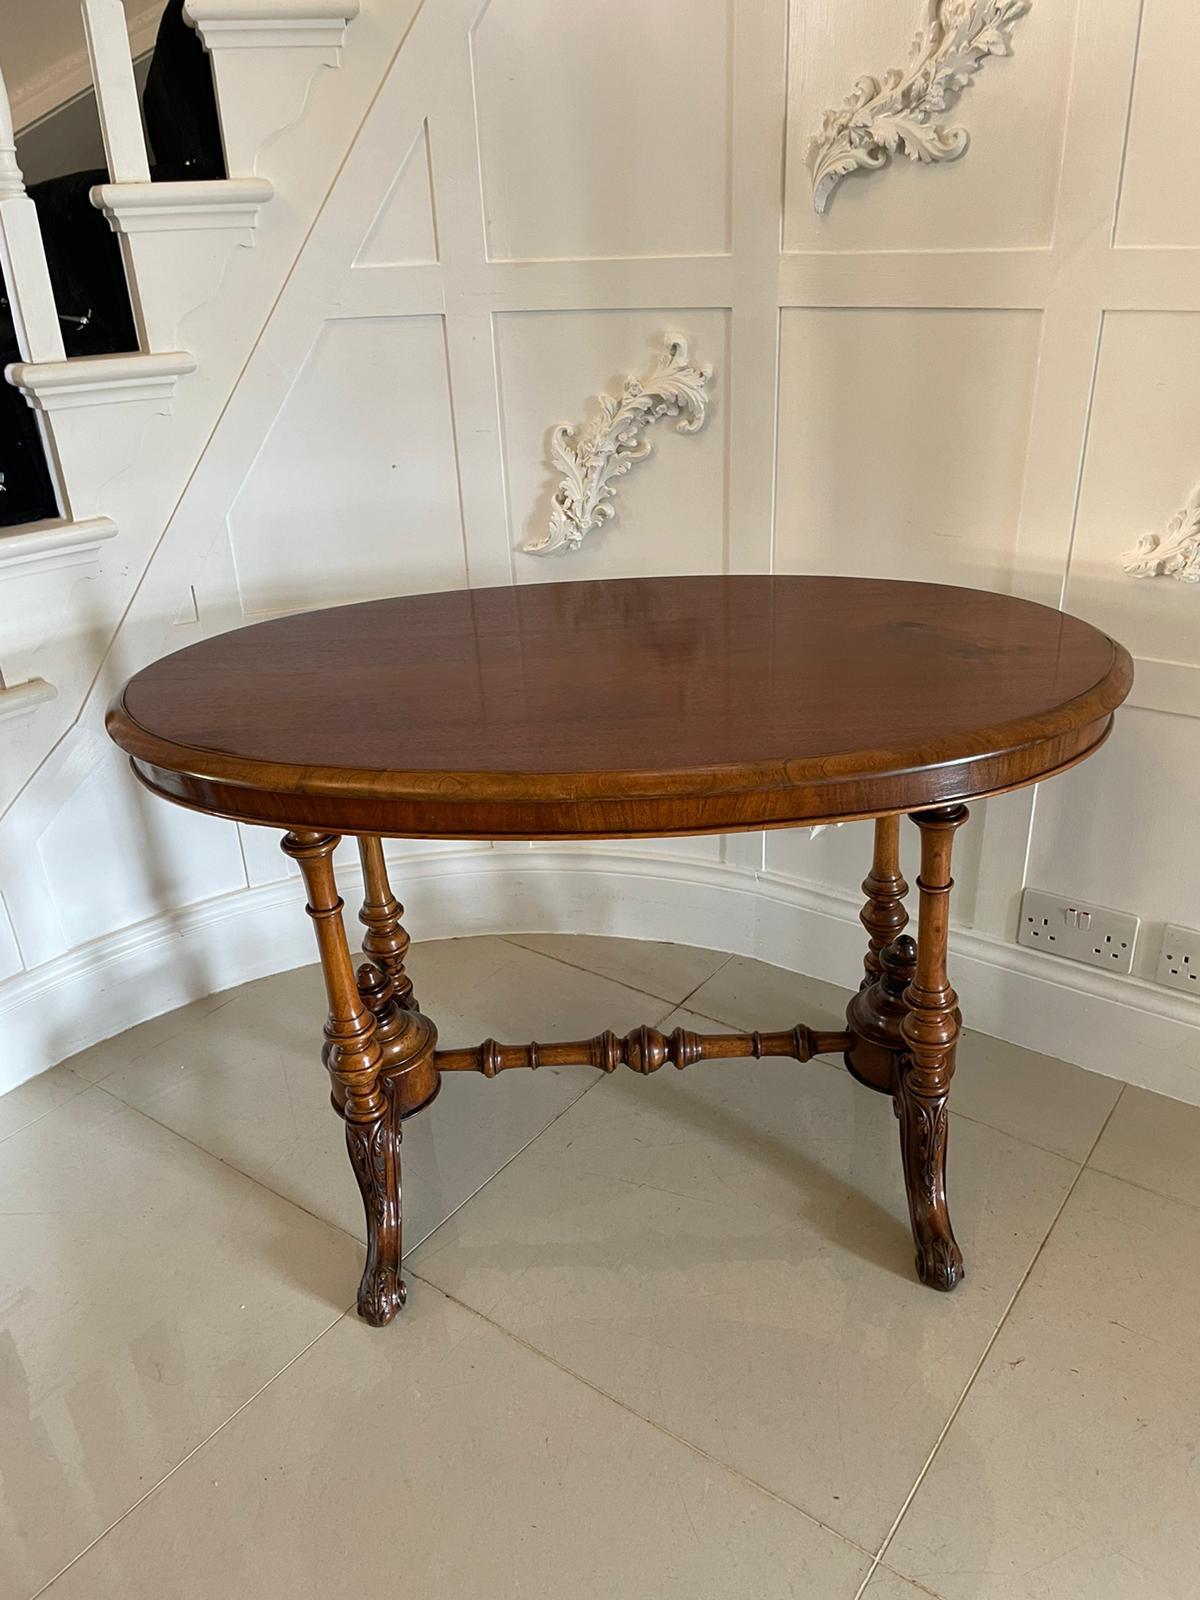 Antique 19th century Victorian oval walnut centre table having a splendid oval solid walnut top and an oval walnut frieze supported by four elegant turned and shaped columns with two turned shaped finials. It is raised on four shaped carved cabriole